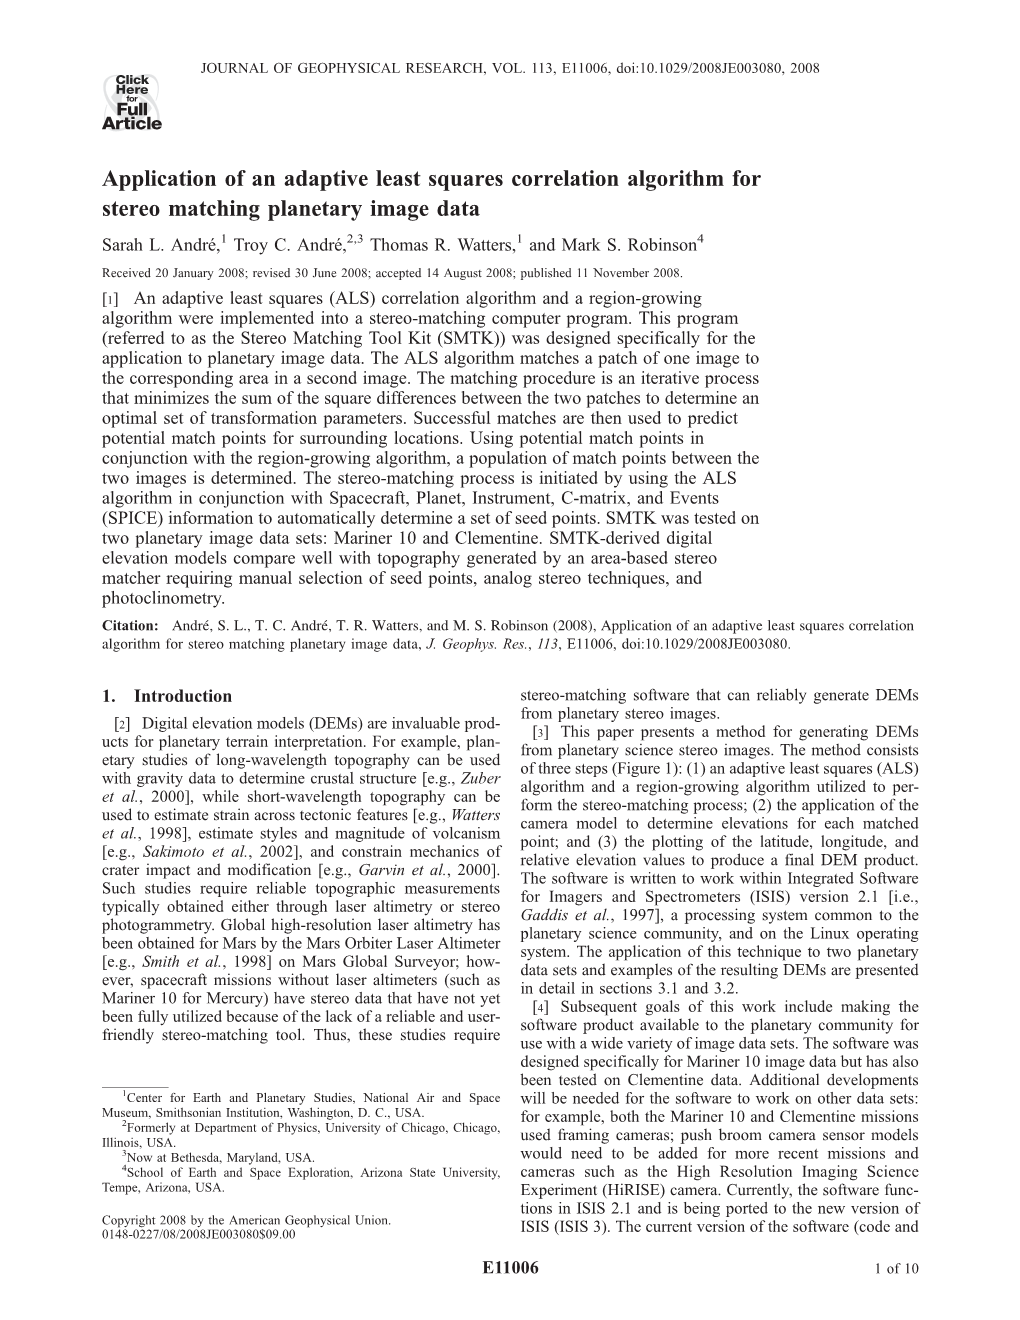 Application of an Adaptive Least Squares Correlation Algorithm for Stereo Matching Planetary Image Data Sarah L